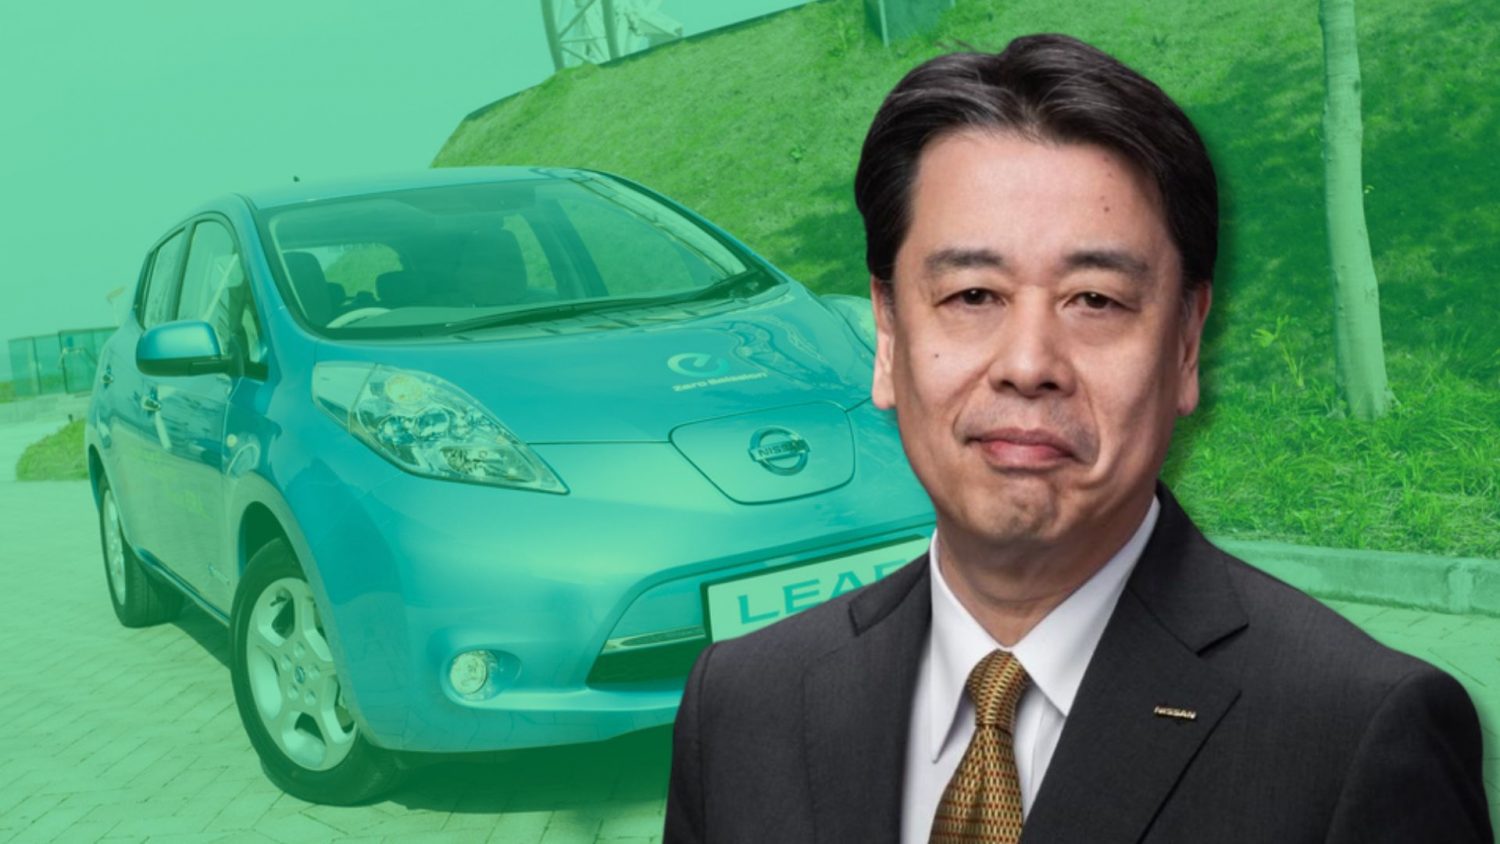 Nissan plans to address EV affordability with lower production costs and better profit margins while selling an additional 1 million units.